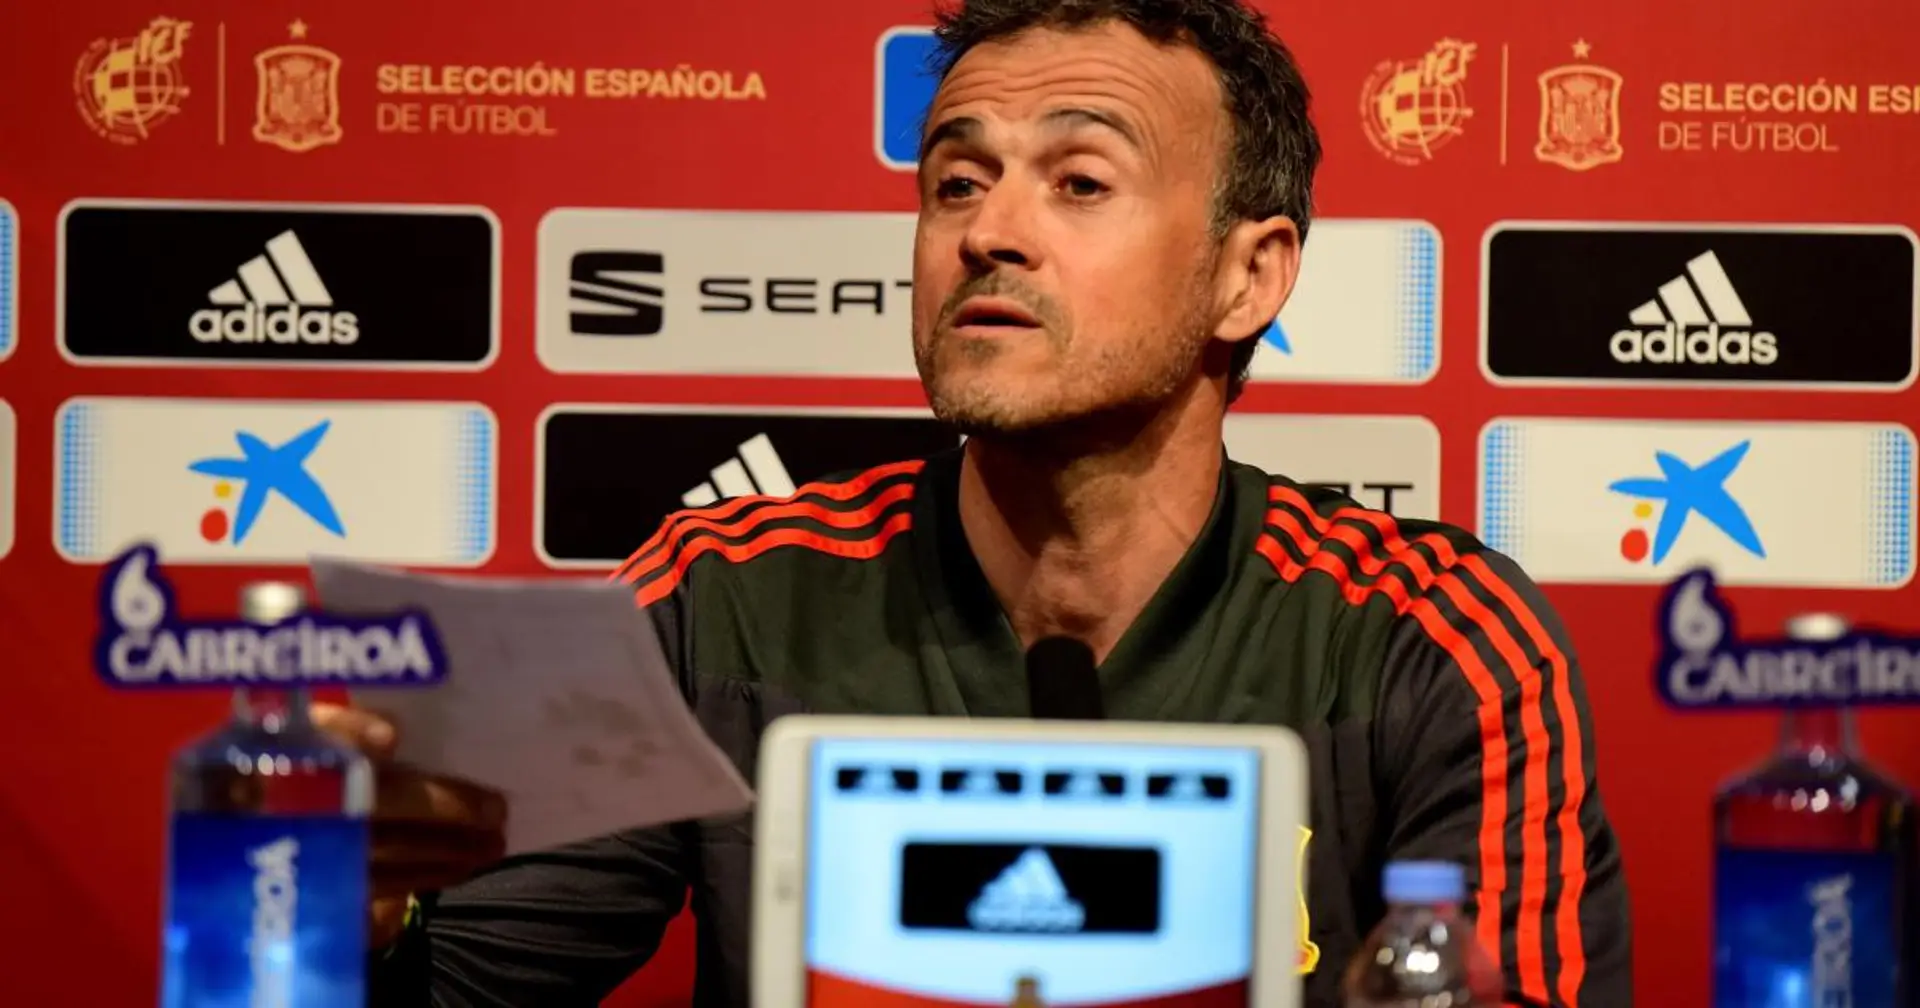 Luis Enrique on his Spain selection: 'If the Euros was tomorrow, this would be the list'